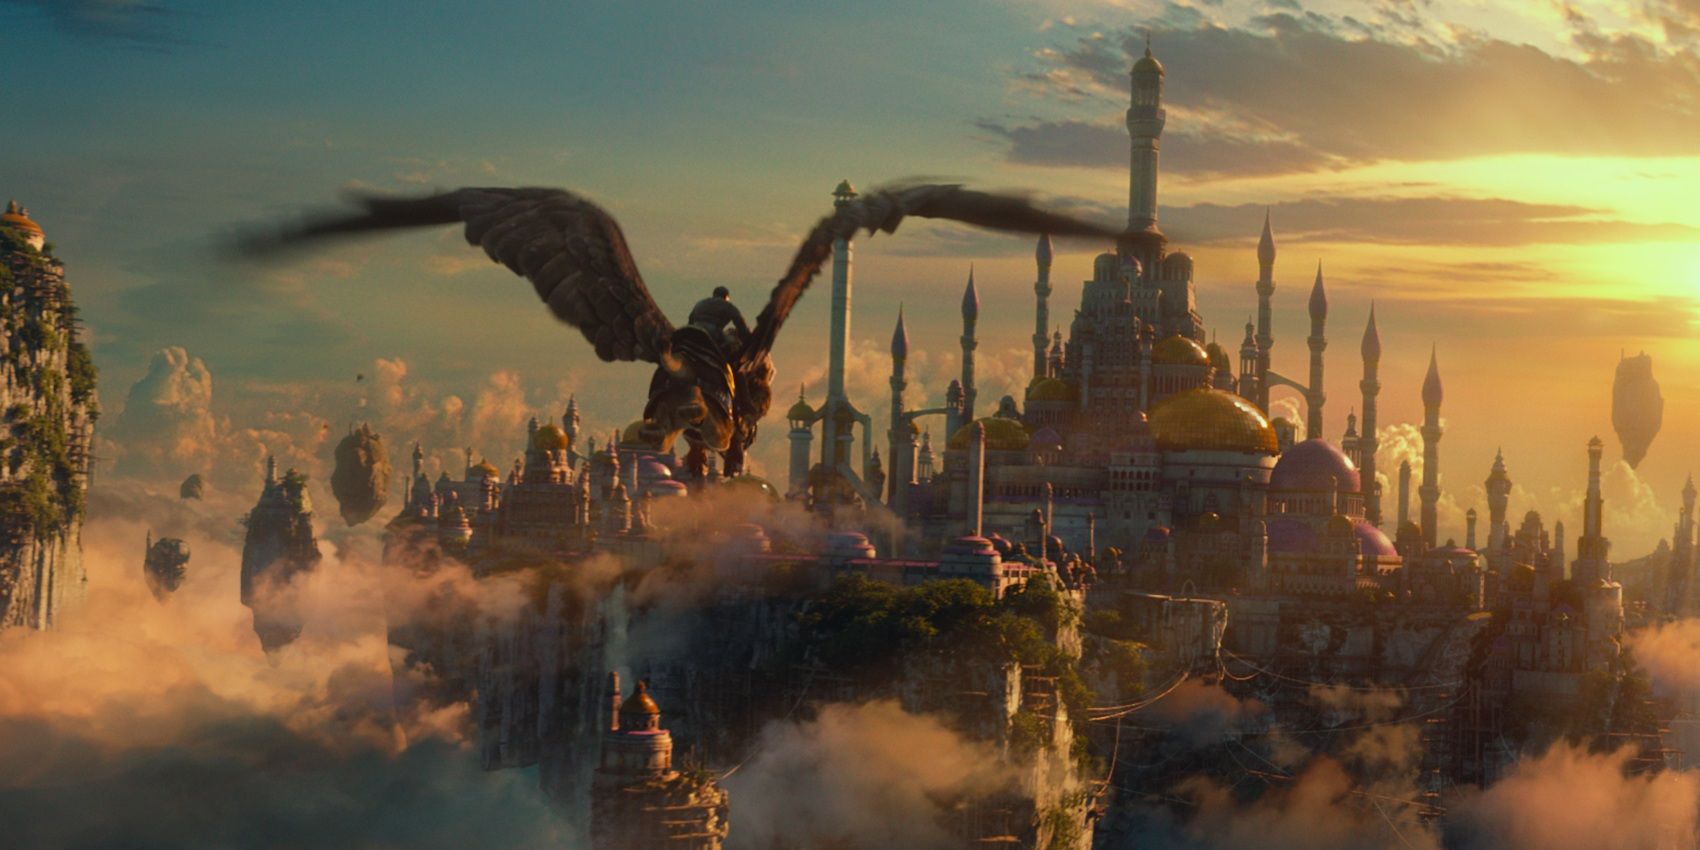 A giant bird flying over the kingdom in the Warcraft movie